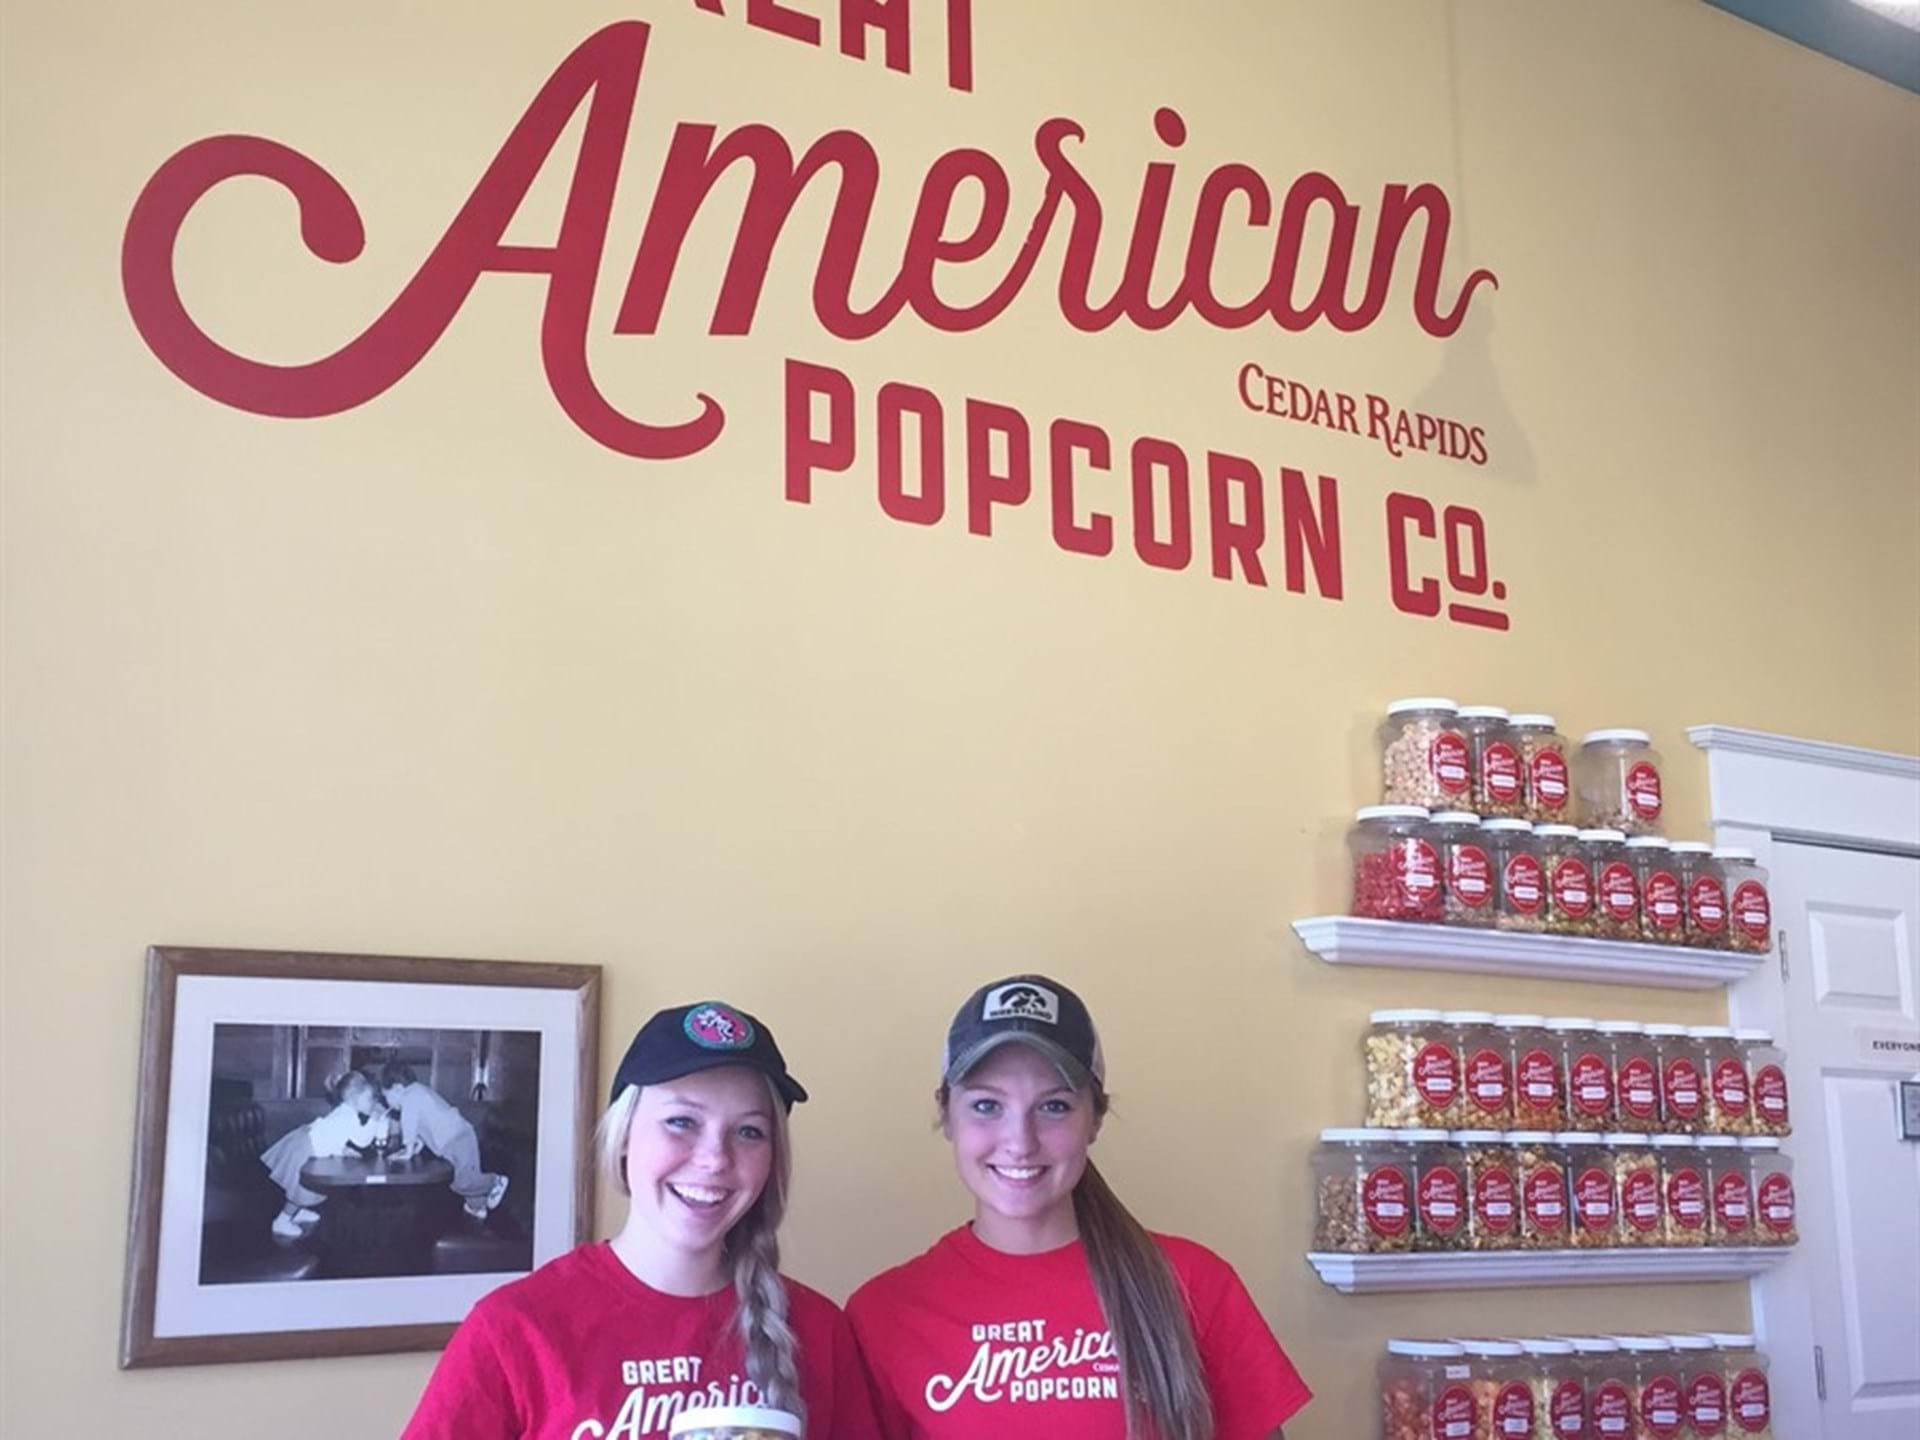 Welcome to Great American Popcorn